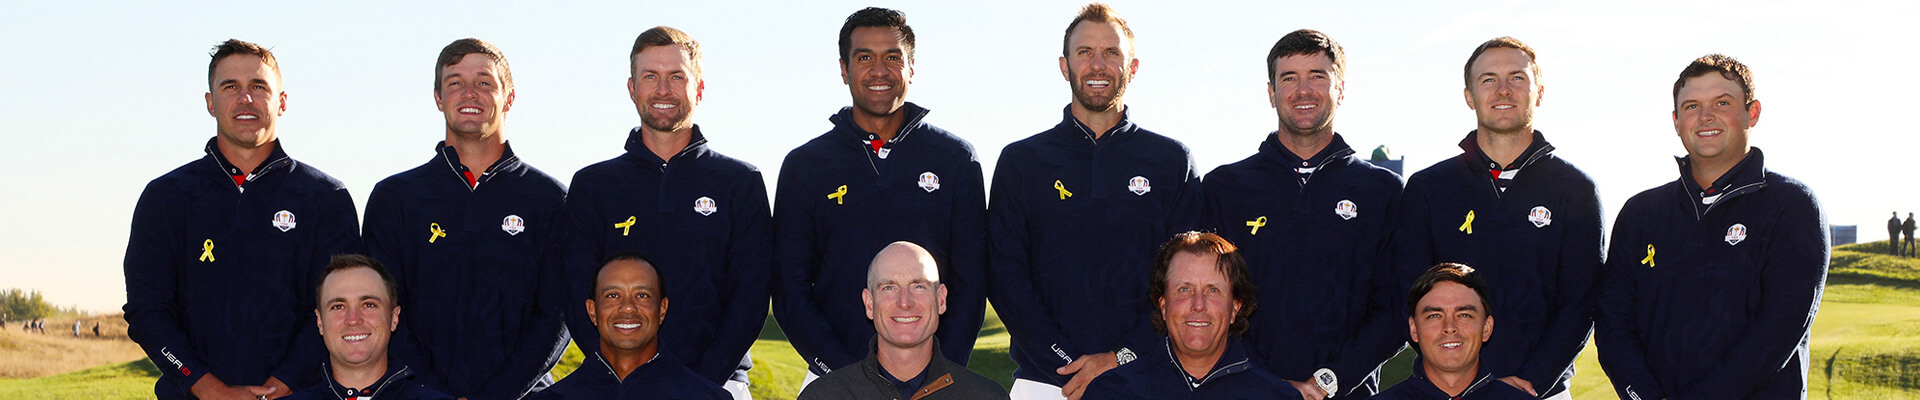 Dustin, Team USA Start Ryder Cup Strong, Ultimately Fall to Surging Team Europe